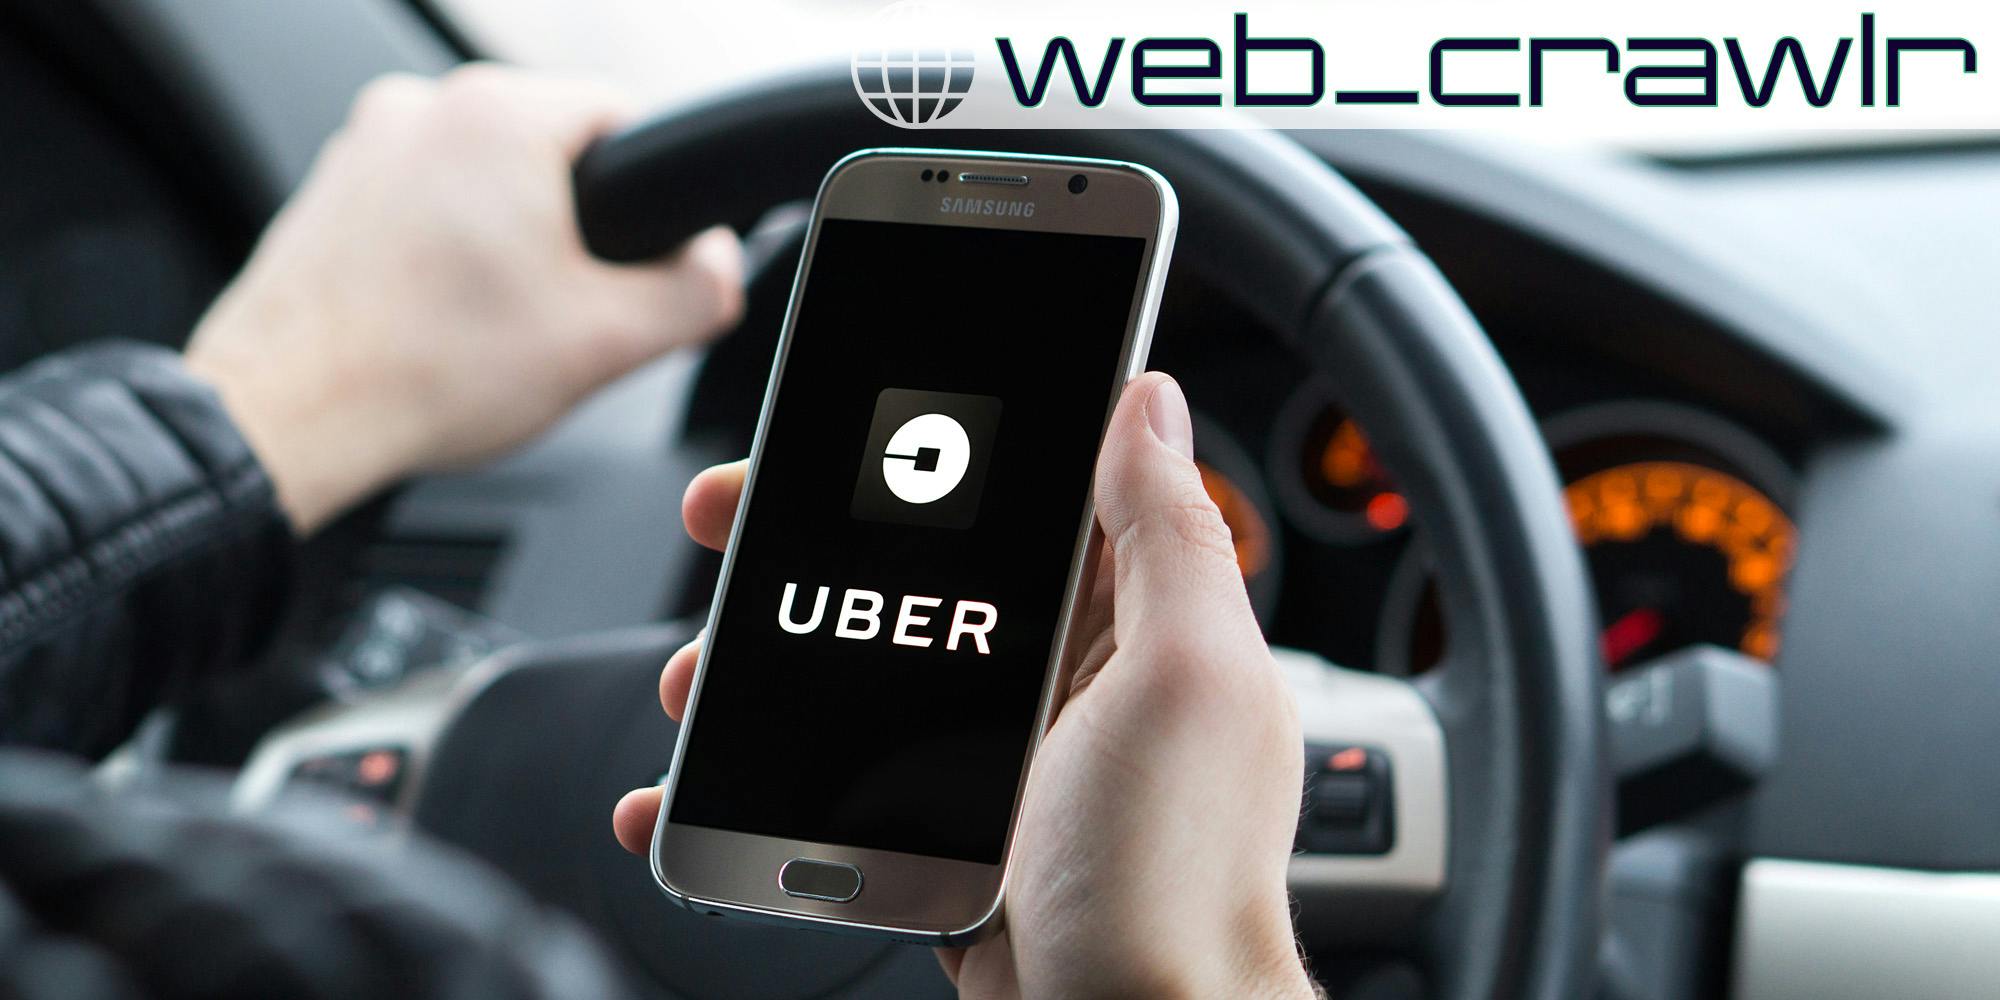 A person driving a car and holding a smartphone with the Uber logo on it. The Daily Dot newsletter web_crawlr logo is in the top right corner.